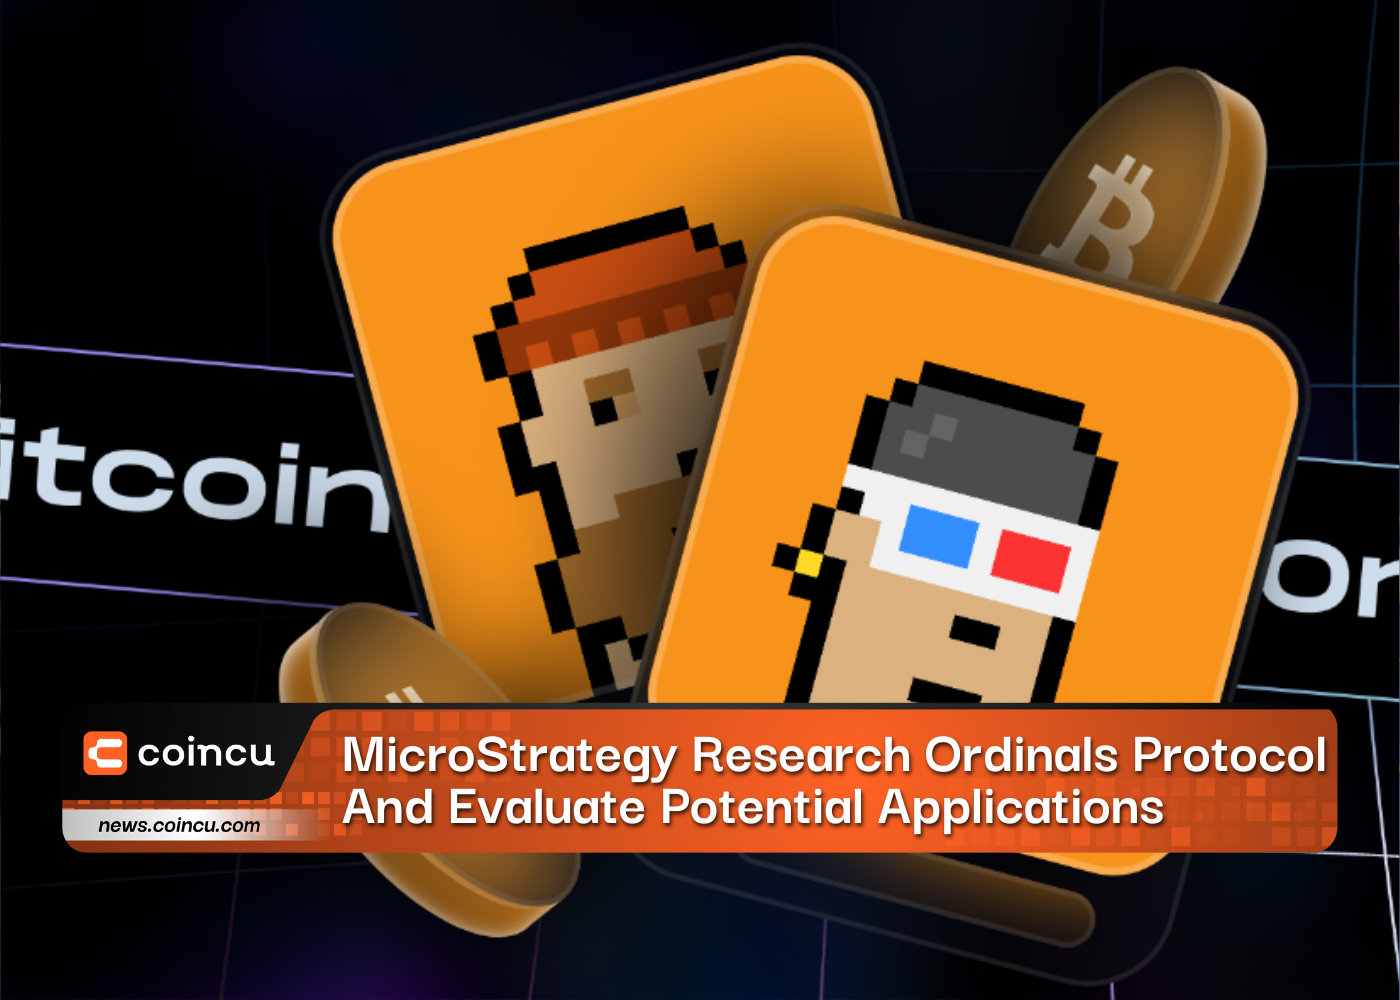 MicroStrategy Research Ordinals Protocol And Evaluate Potential Applications